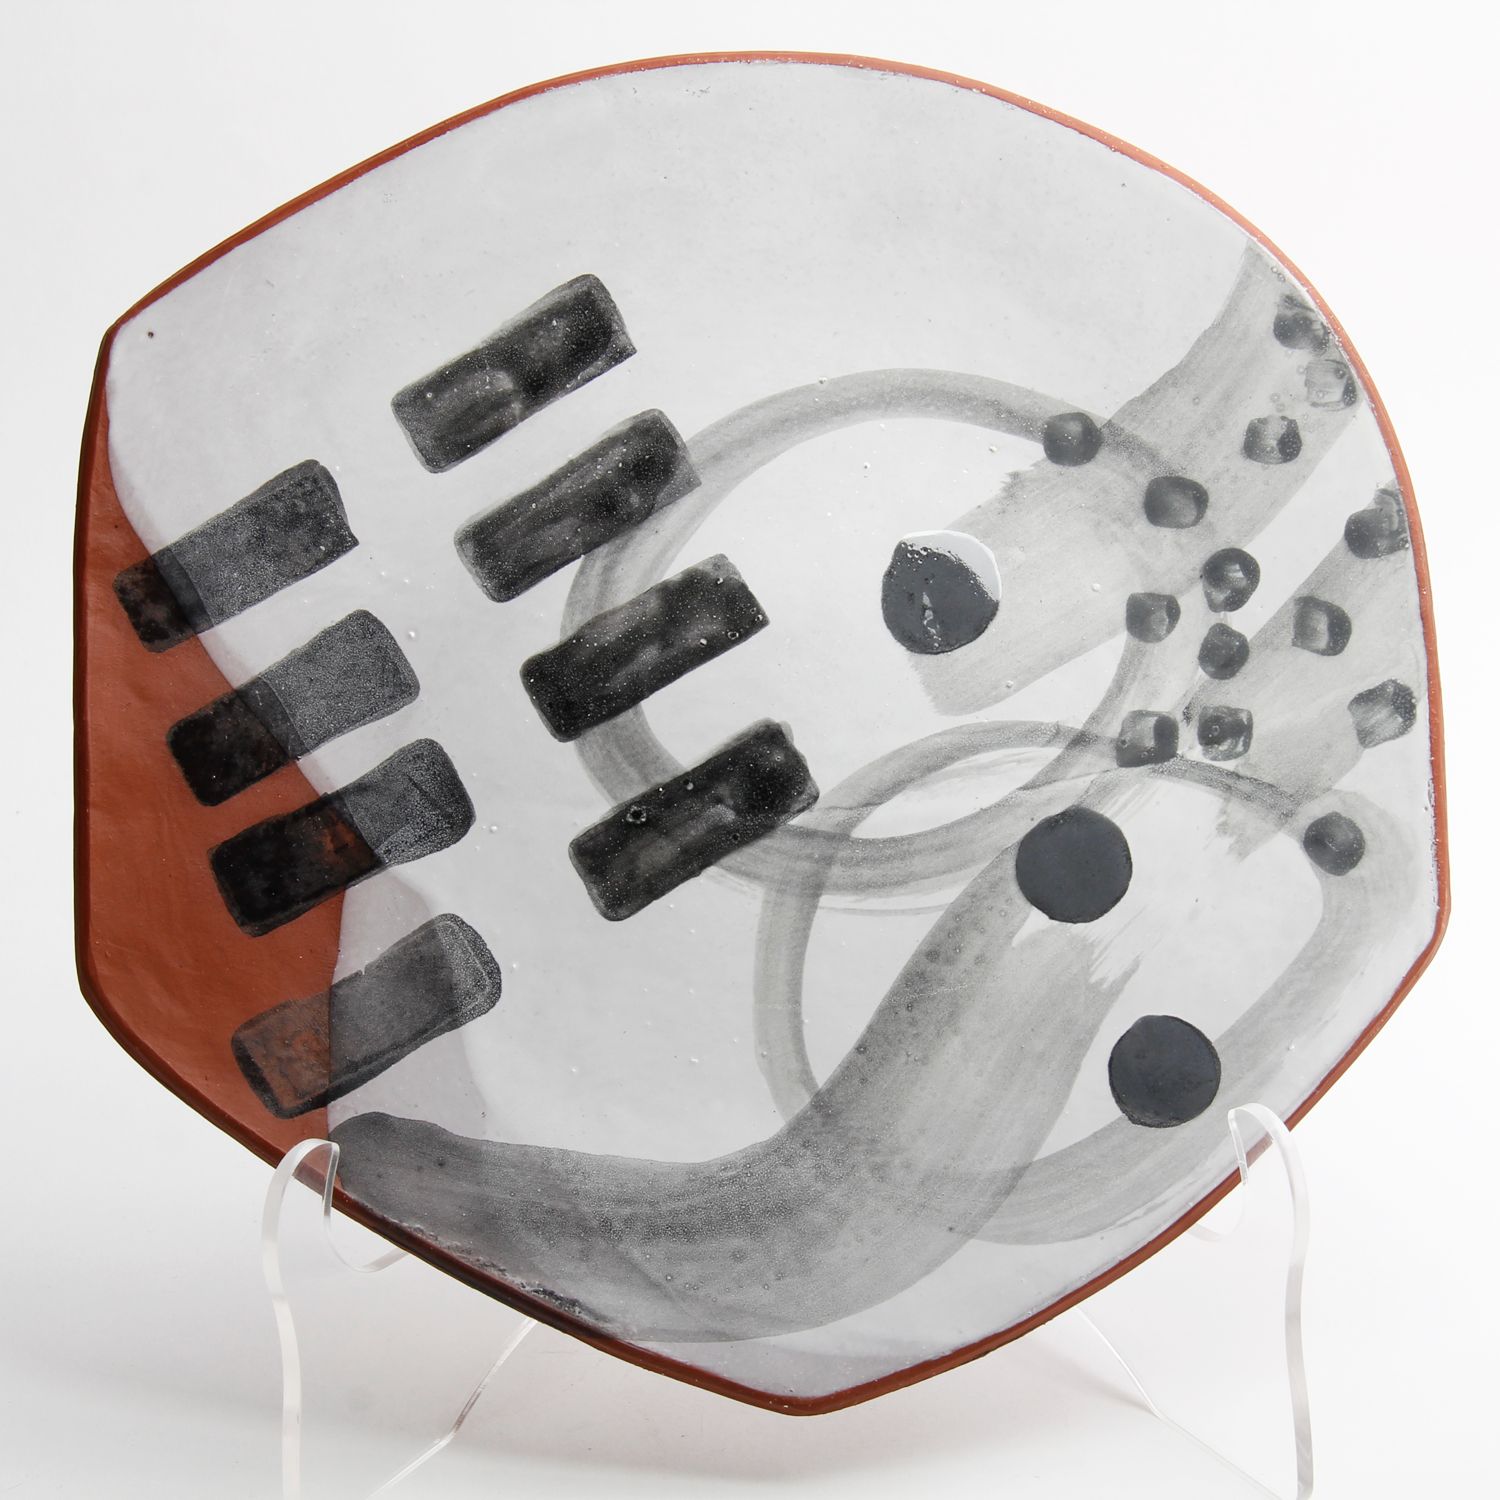 Mary McKenzie: Large Platter – Circles & Rectangles Product Image 1 of 2